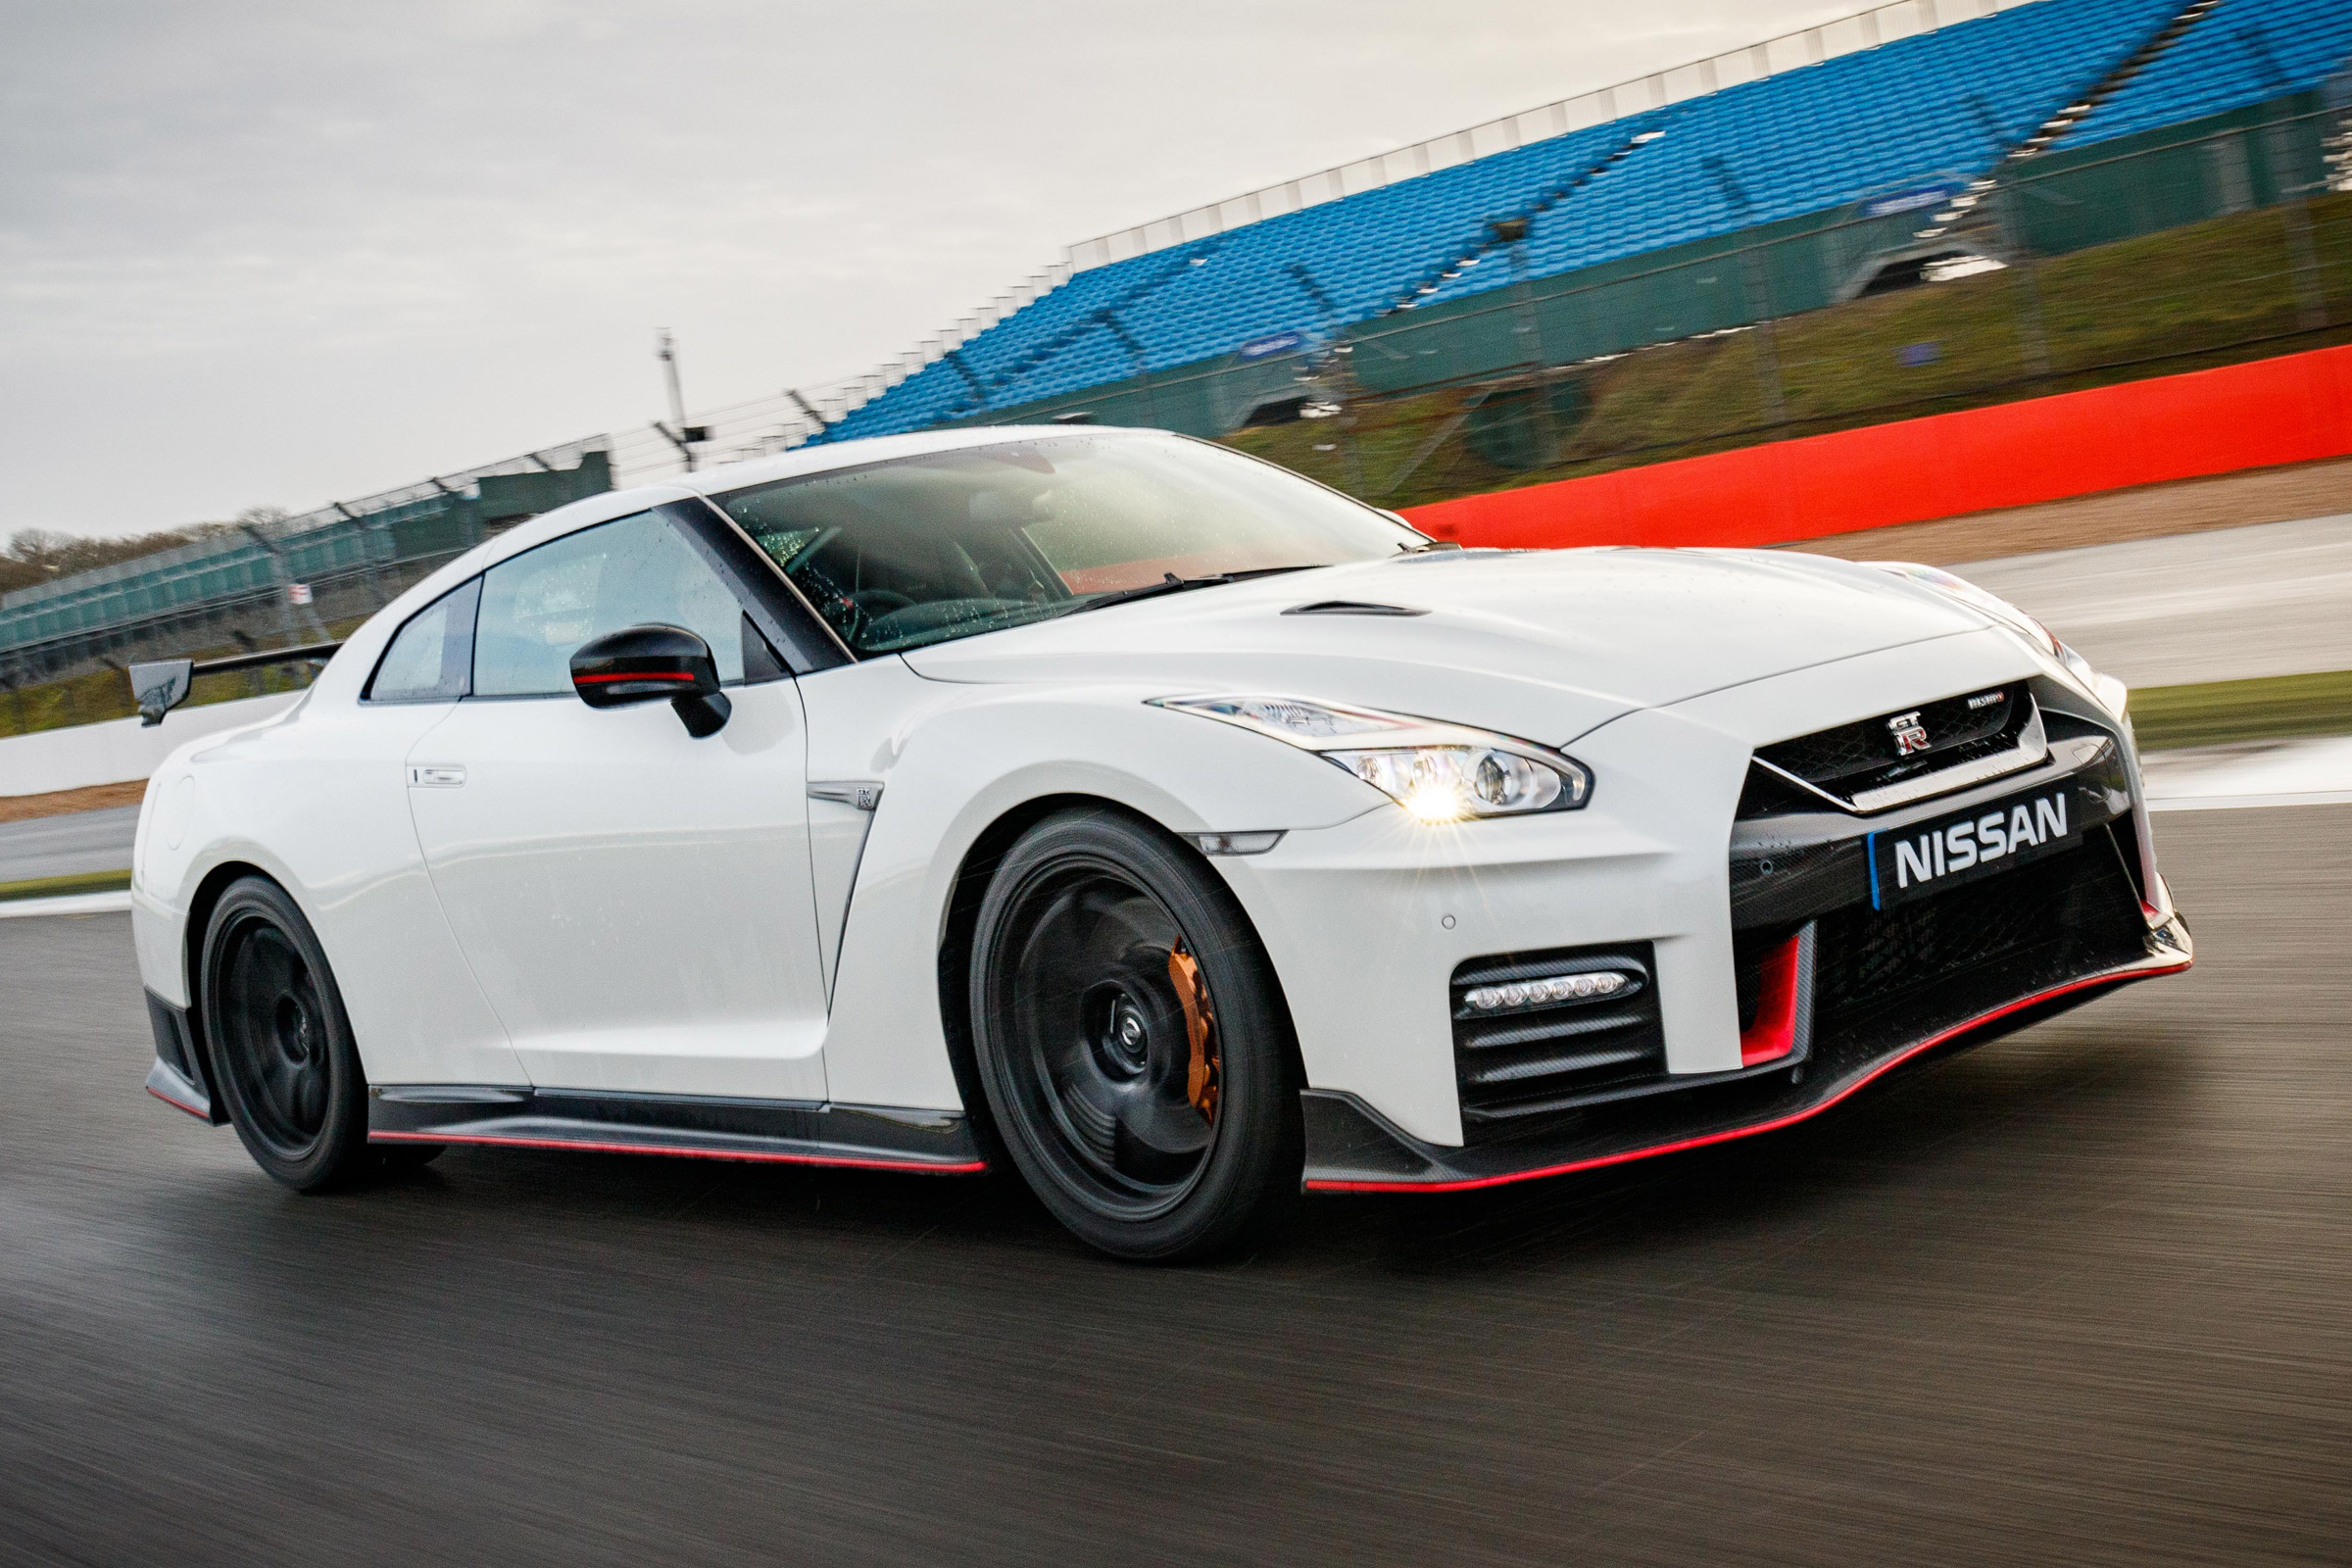 New Nissan GT-R NISMO 2017 review | Auto Express